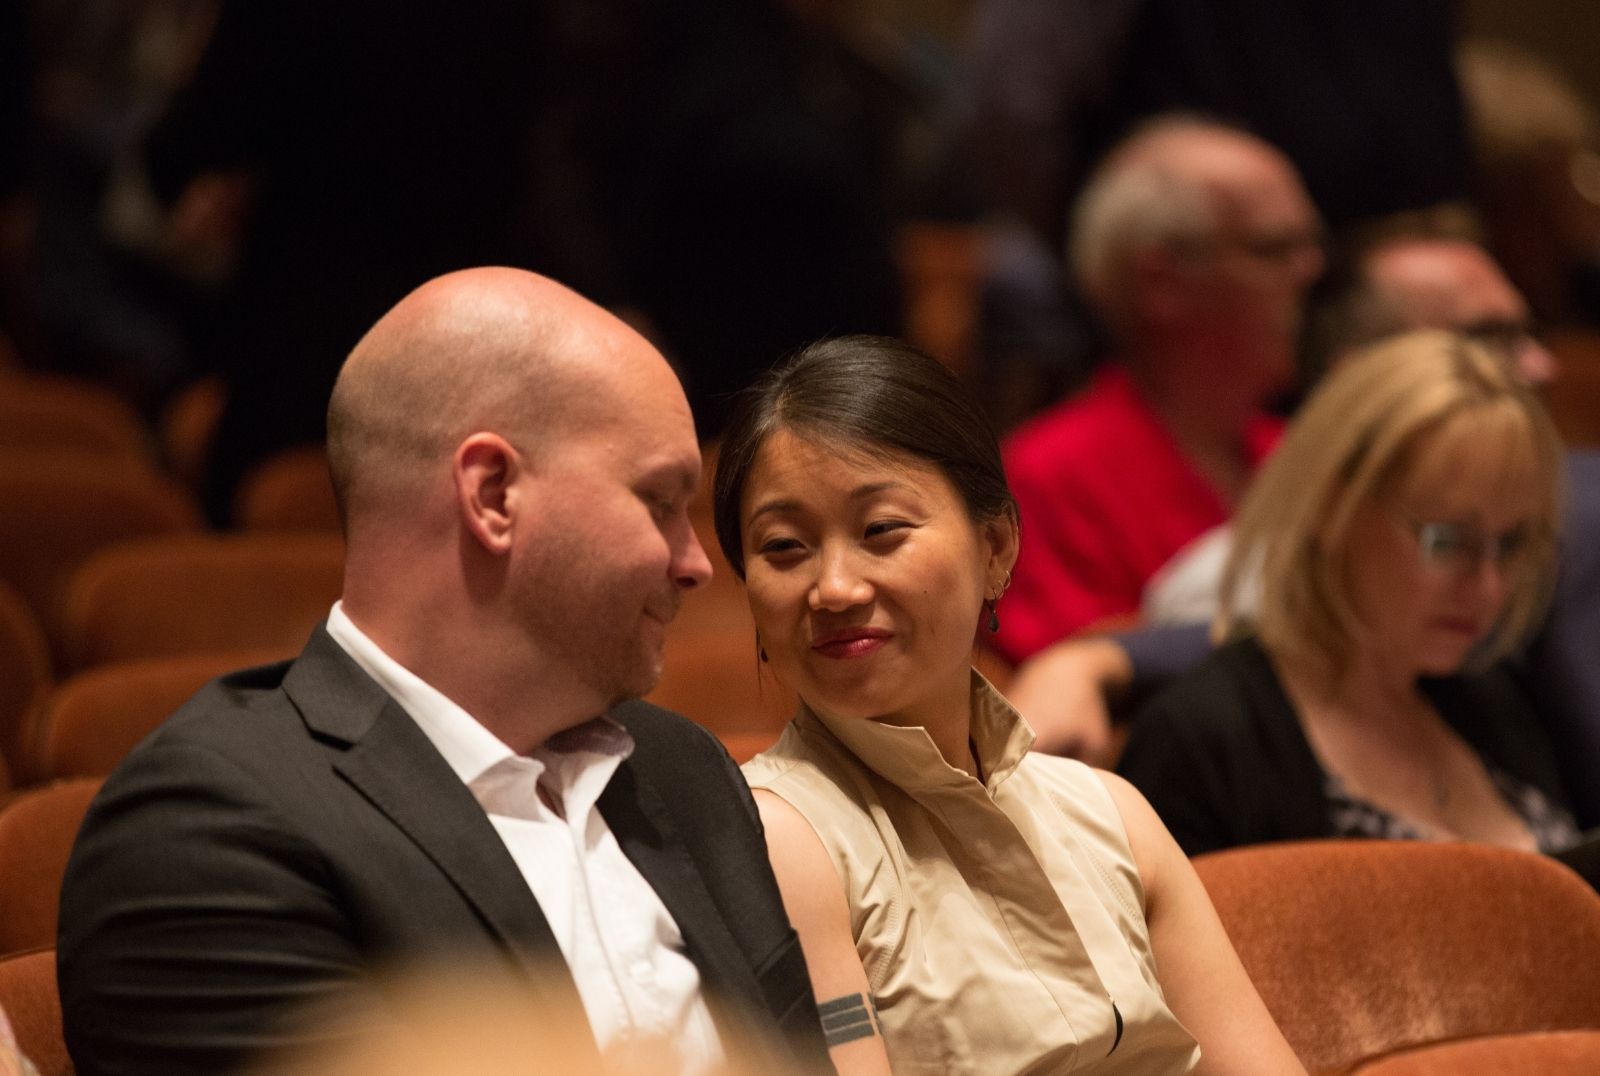 Couple sitting in the concert hall at the meyerson